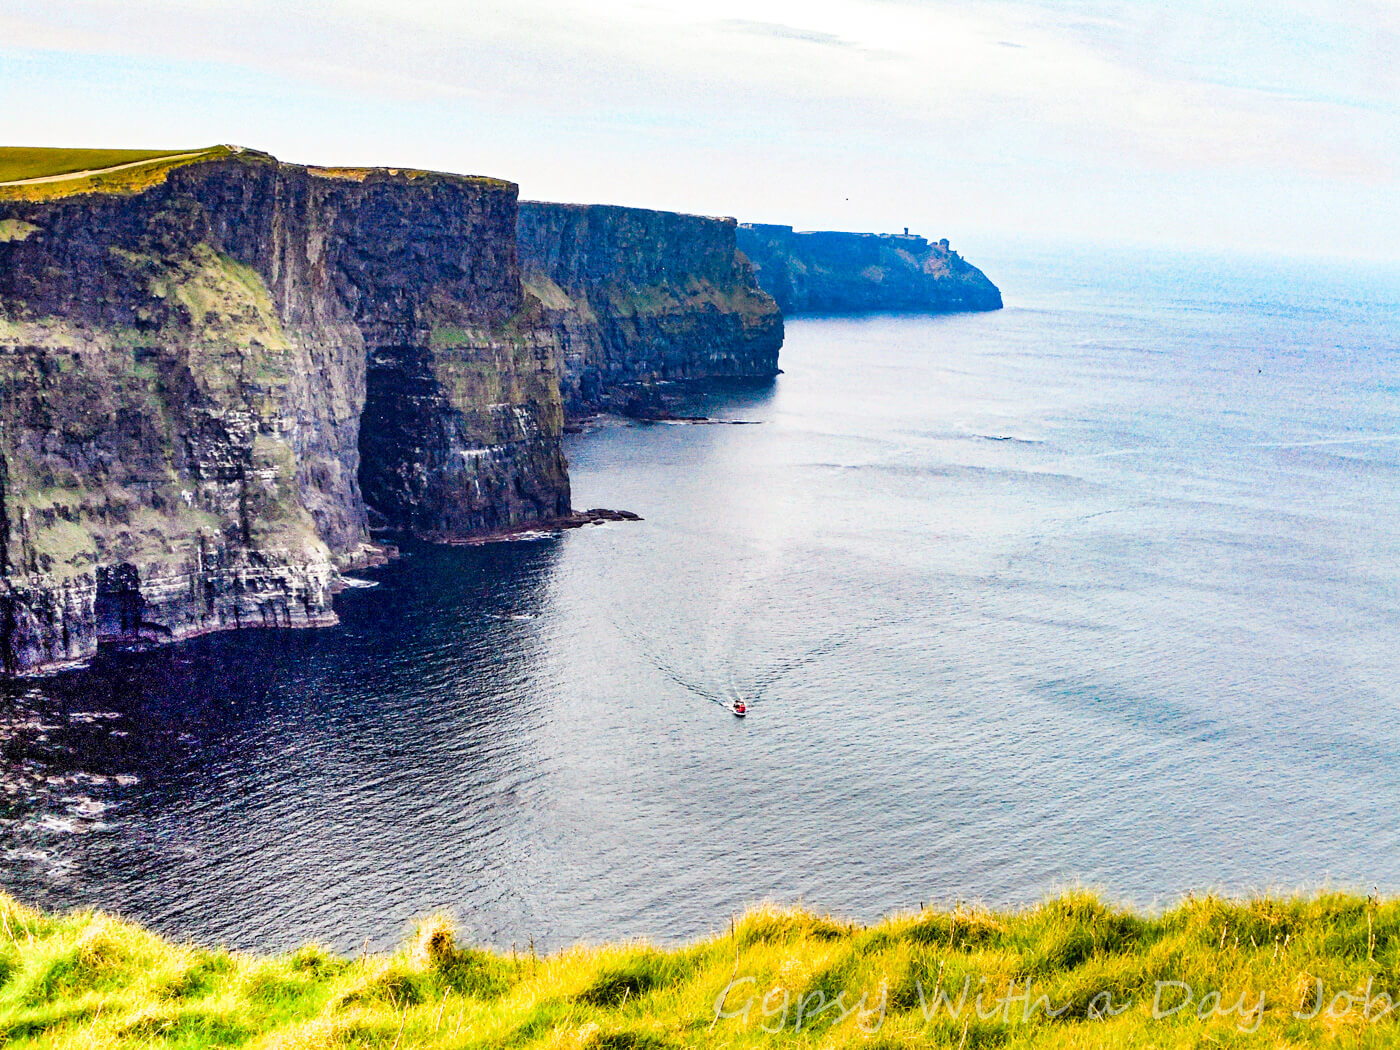 O'Brien's Tower and the Cliffs of Moher, a must see destination in Ireland!